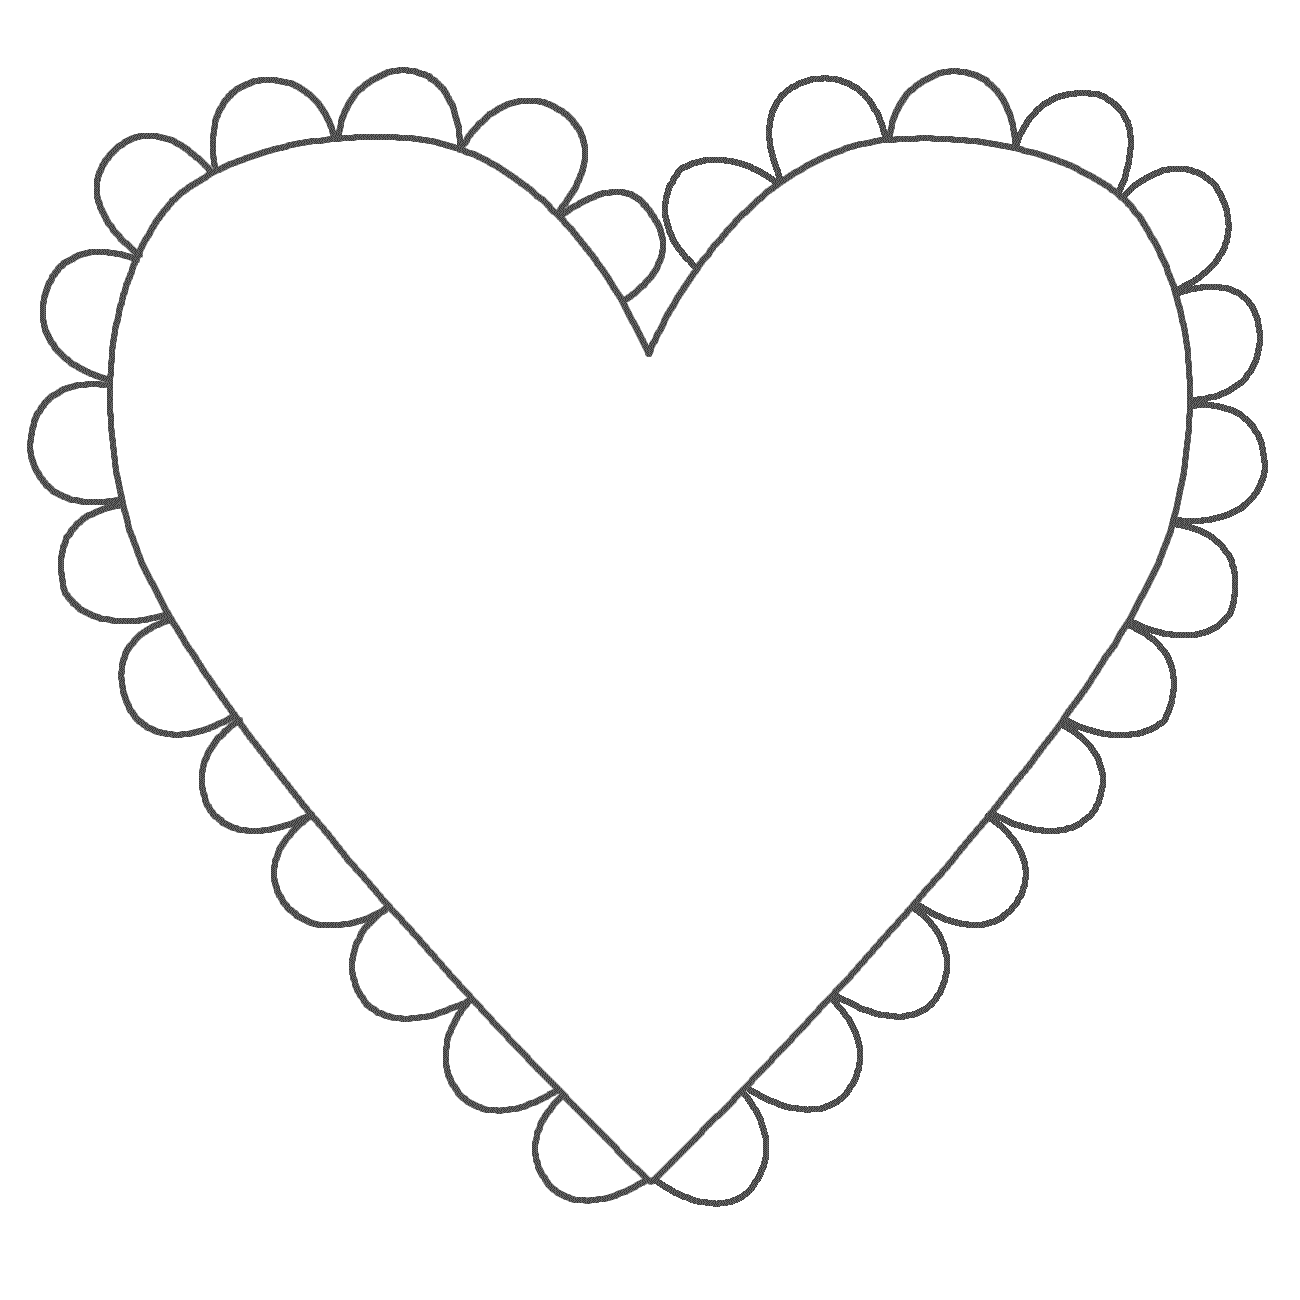 Coloring Page Of Heart - Coloring Pages For All Ages